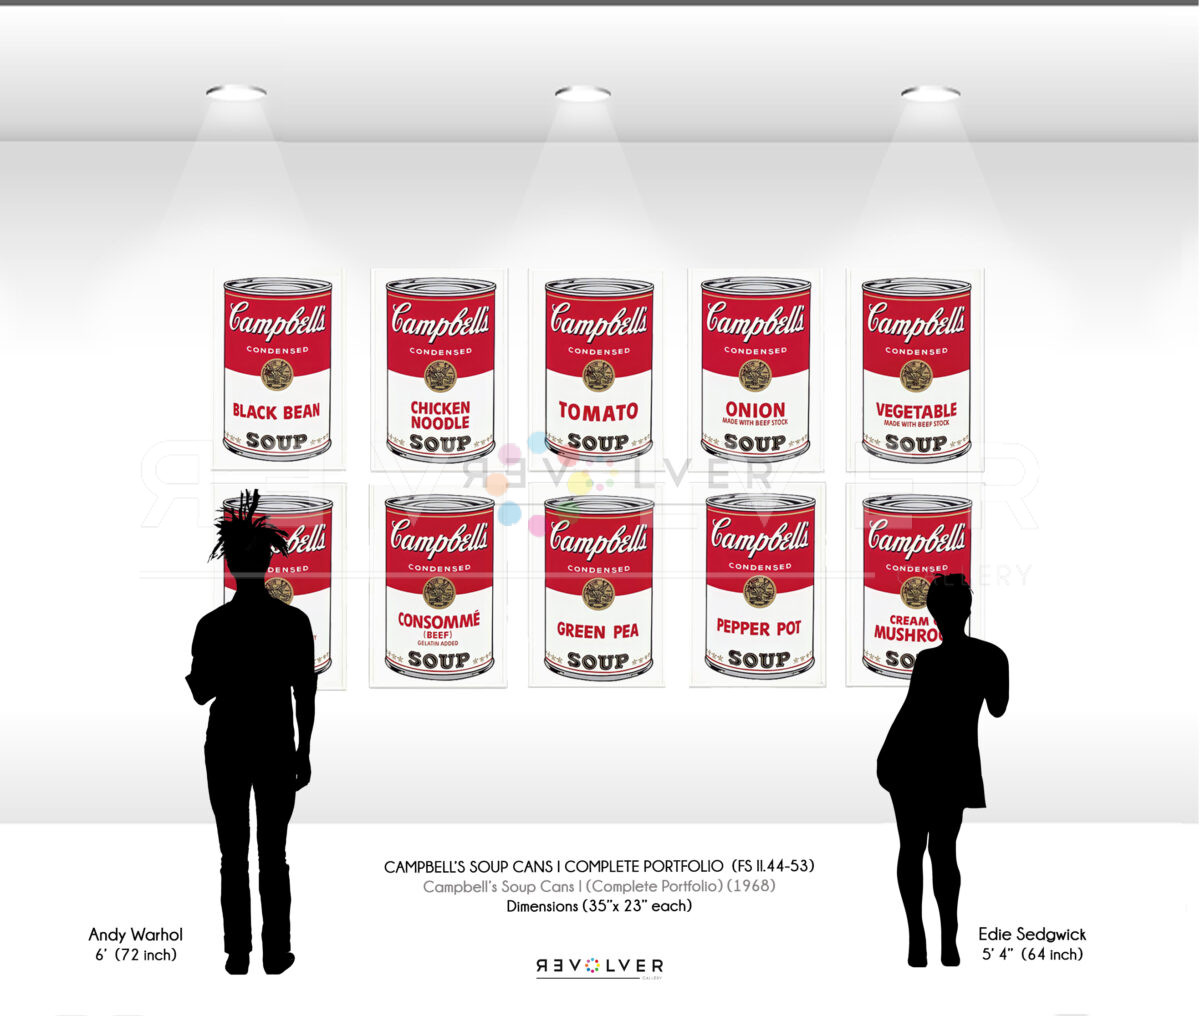 Size comparison image showing the size of the Campbell's Soup Cans I Complete Portfolio relative to the height of Warhol and Edie Sedgwick.